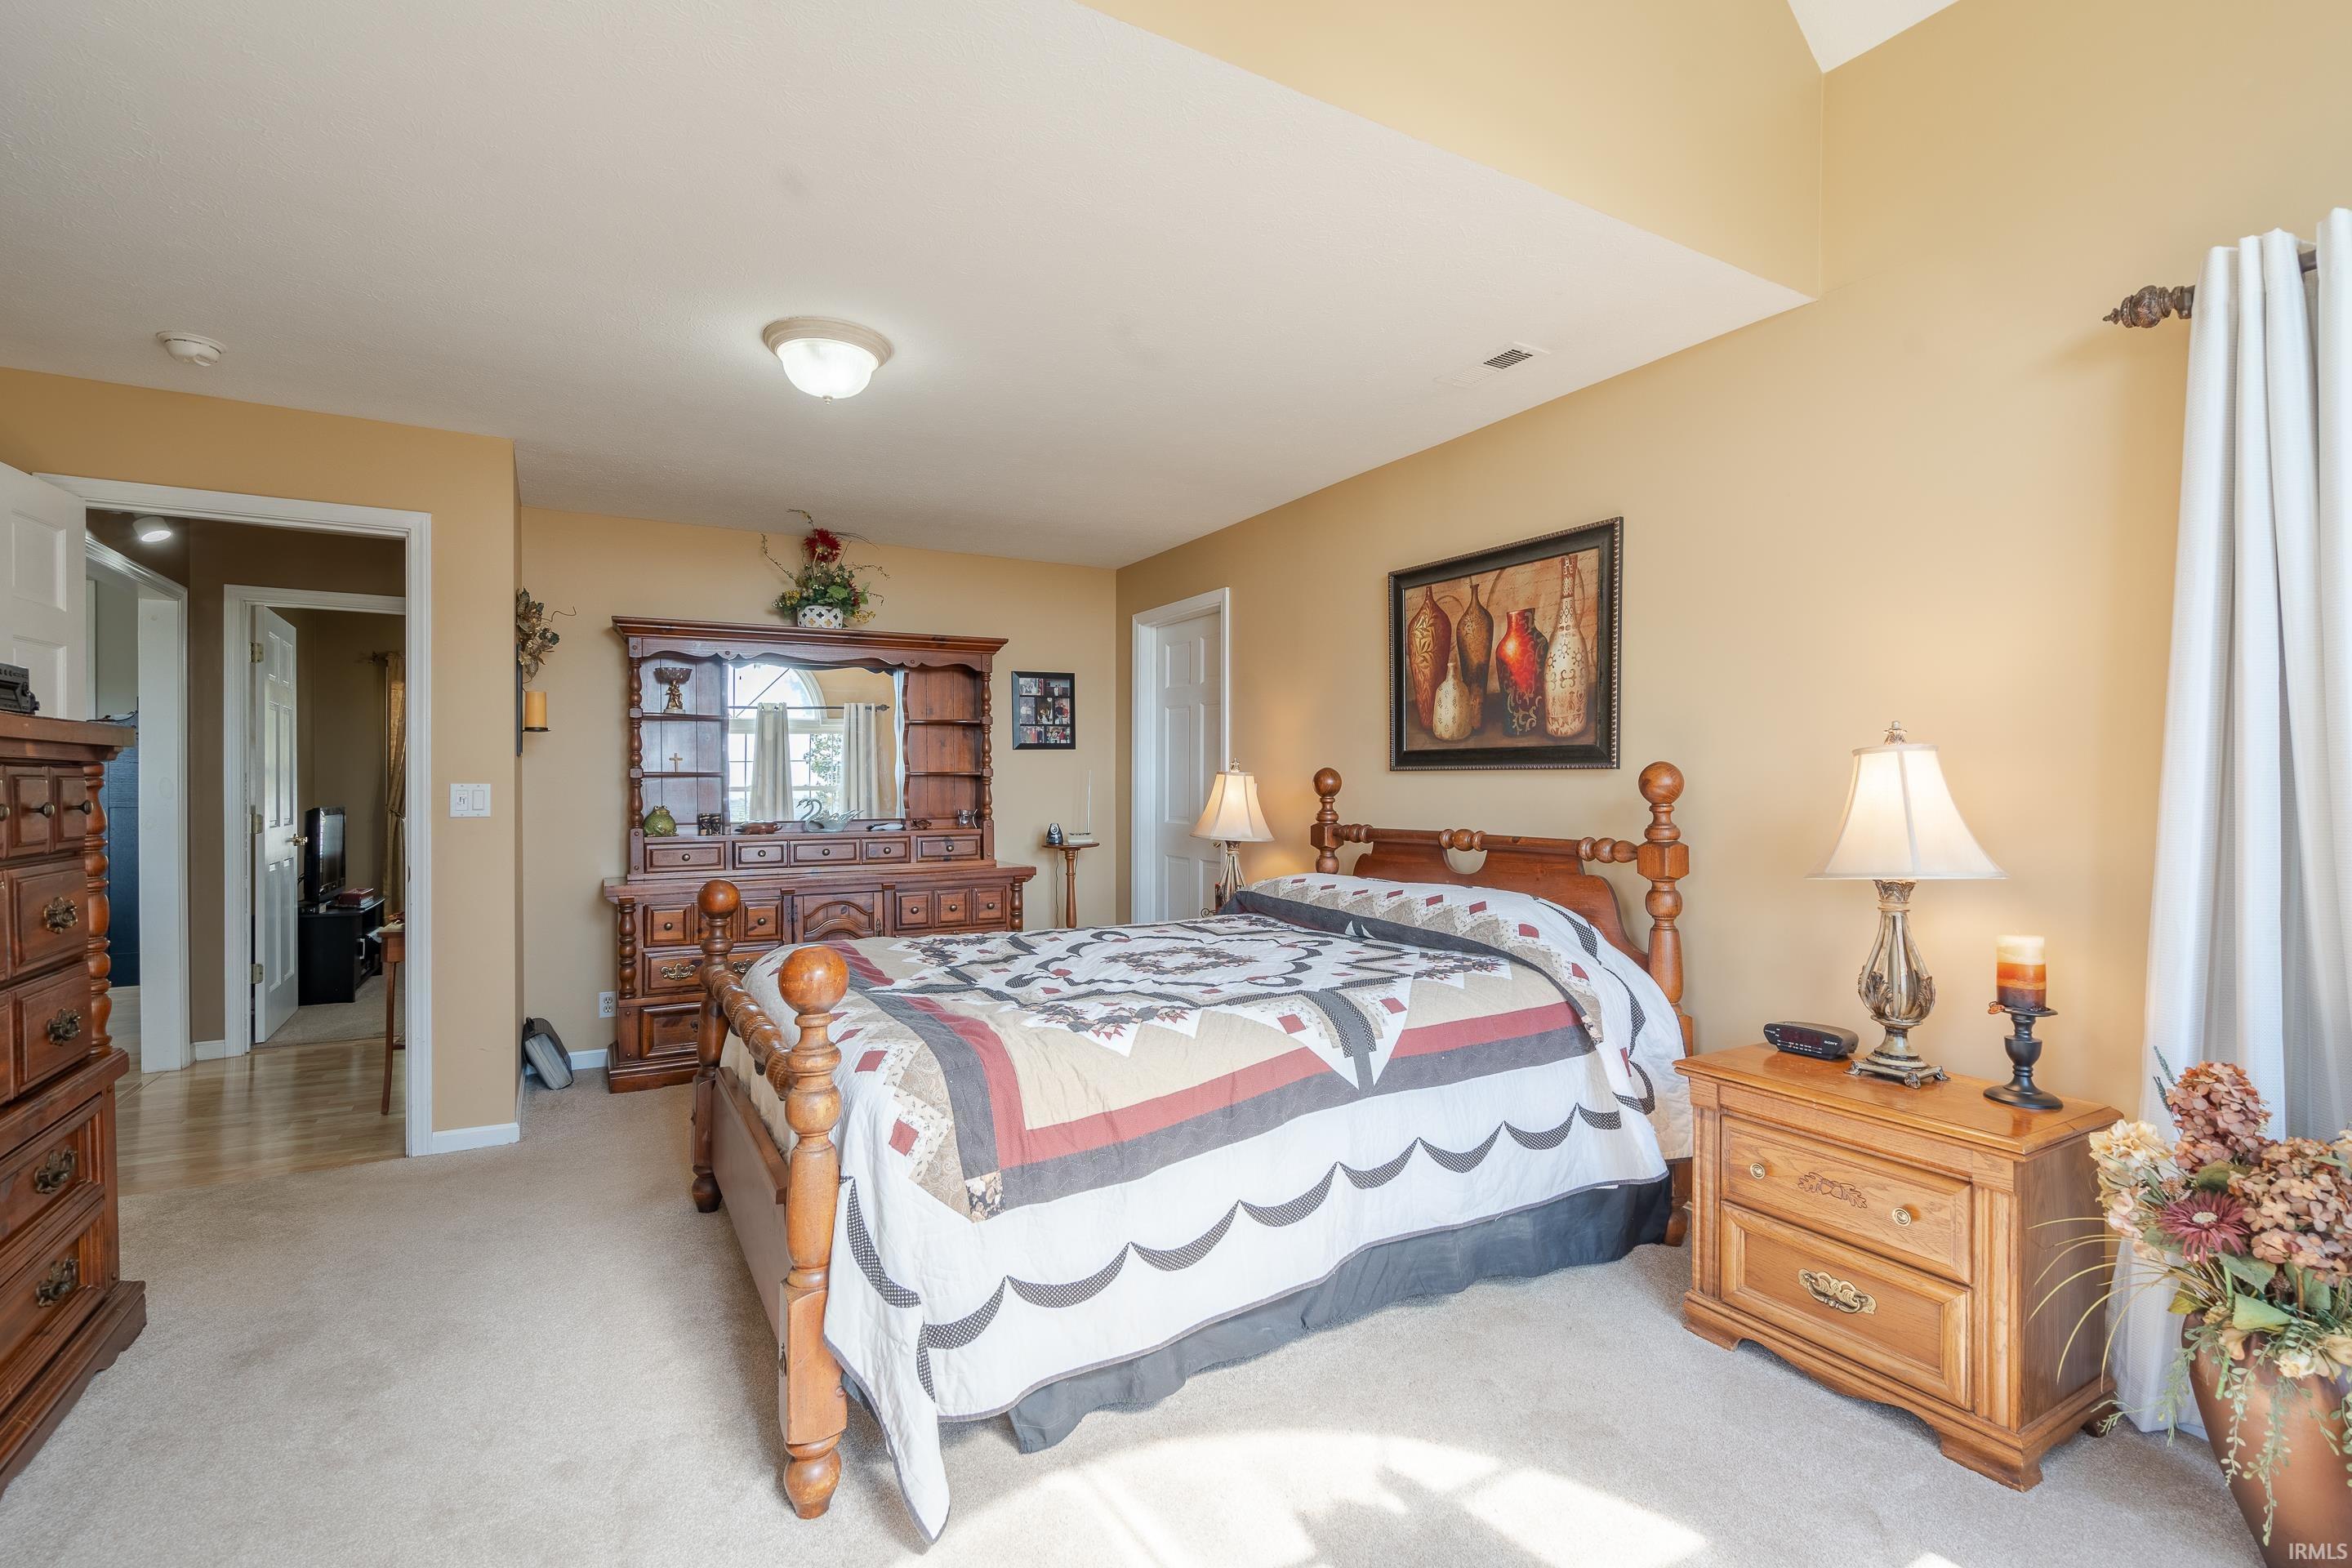 THIS SPACIOUS MASTER  OFFERS LOTS OF BEAUTIFUL WINDOWS INCLUDING A LARGE ARCHED WINDOW.  THERE IS ALSO A HUGE WALK IN CLOSET, YOU WON'T BELIEVE THE SIZE OF IT.